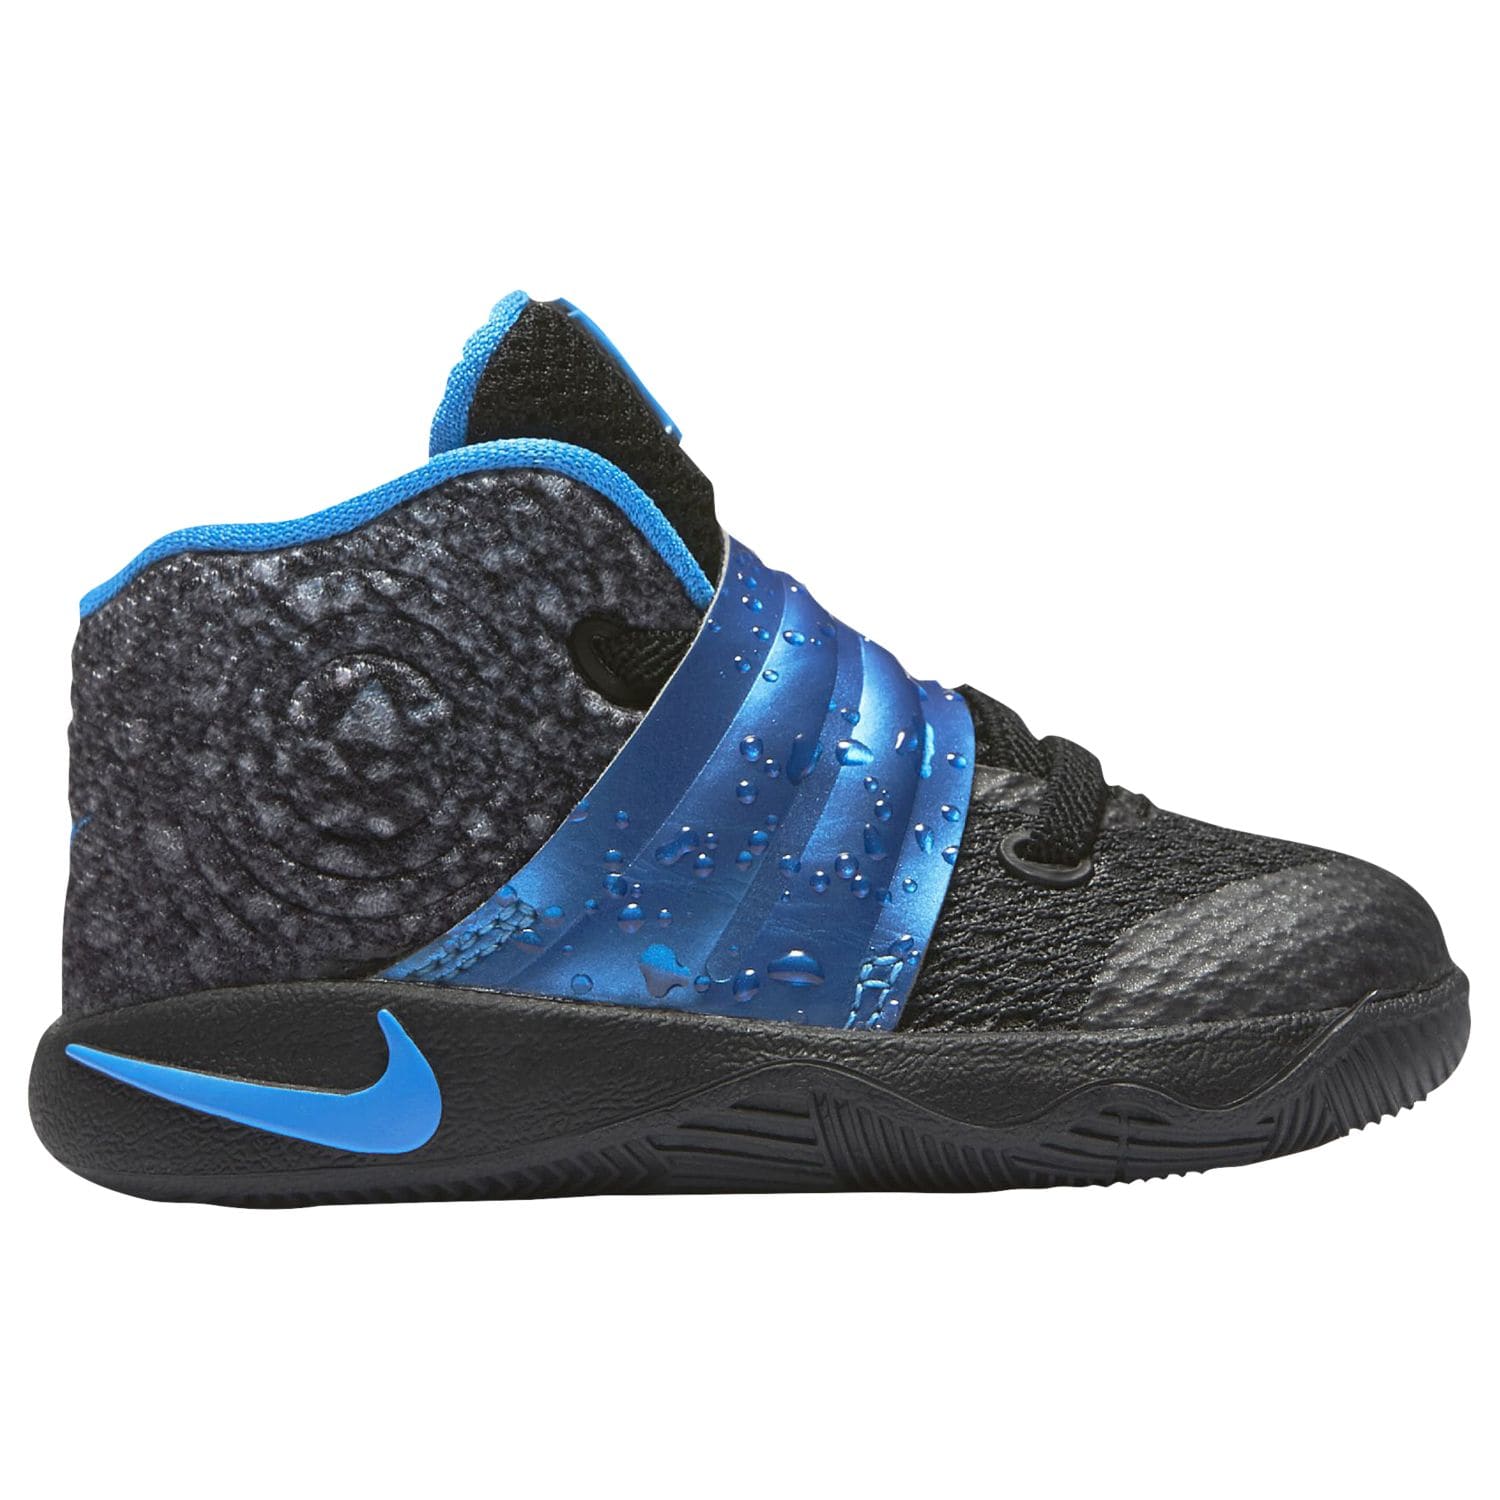 kyrie 2 kids buy shoes